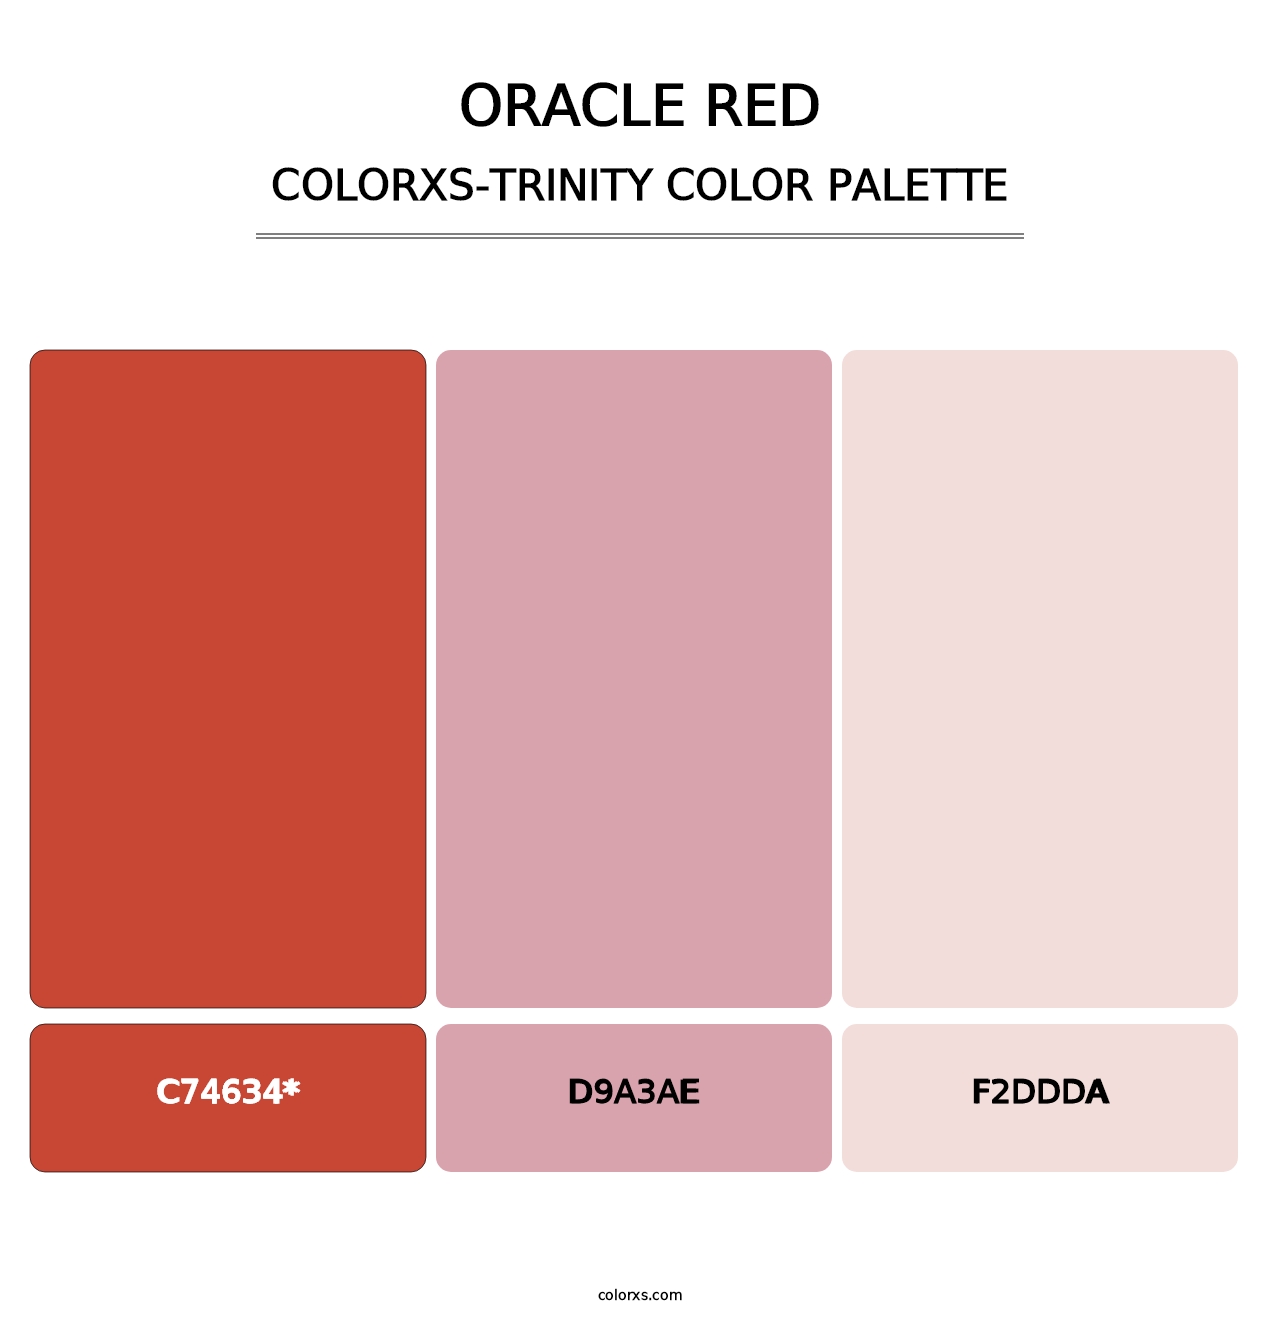 Oracle Red - Colorxs Trinity Palette